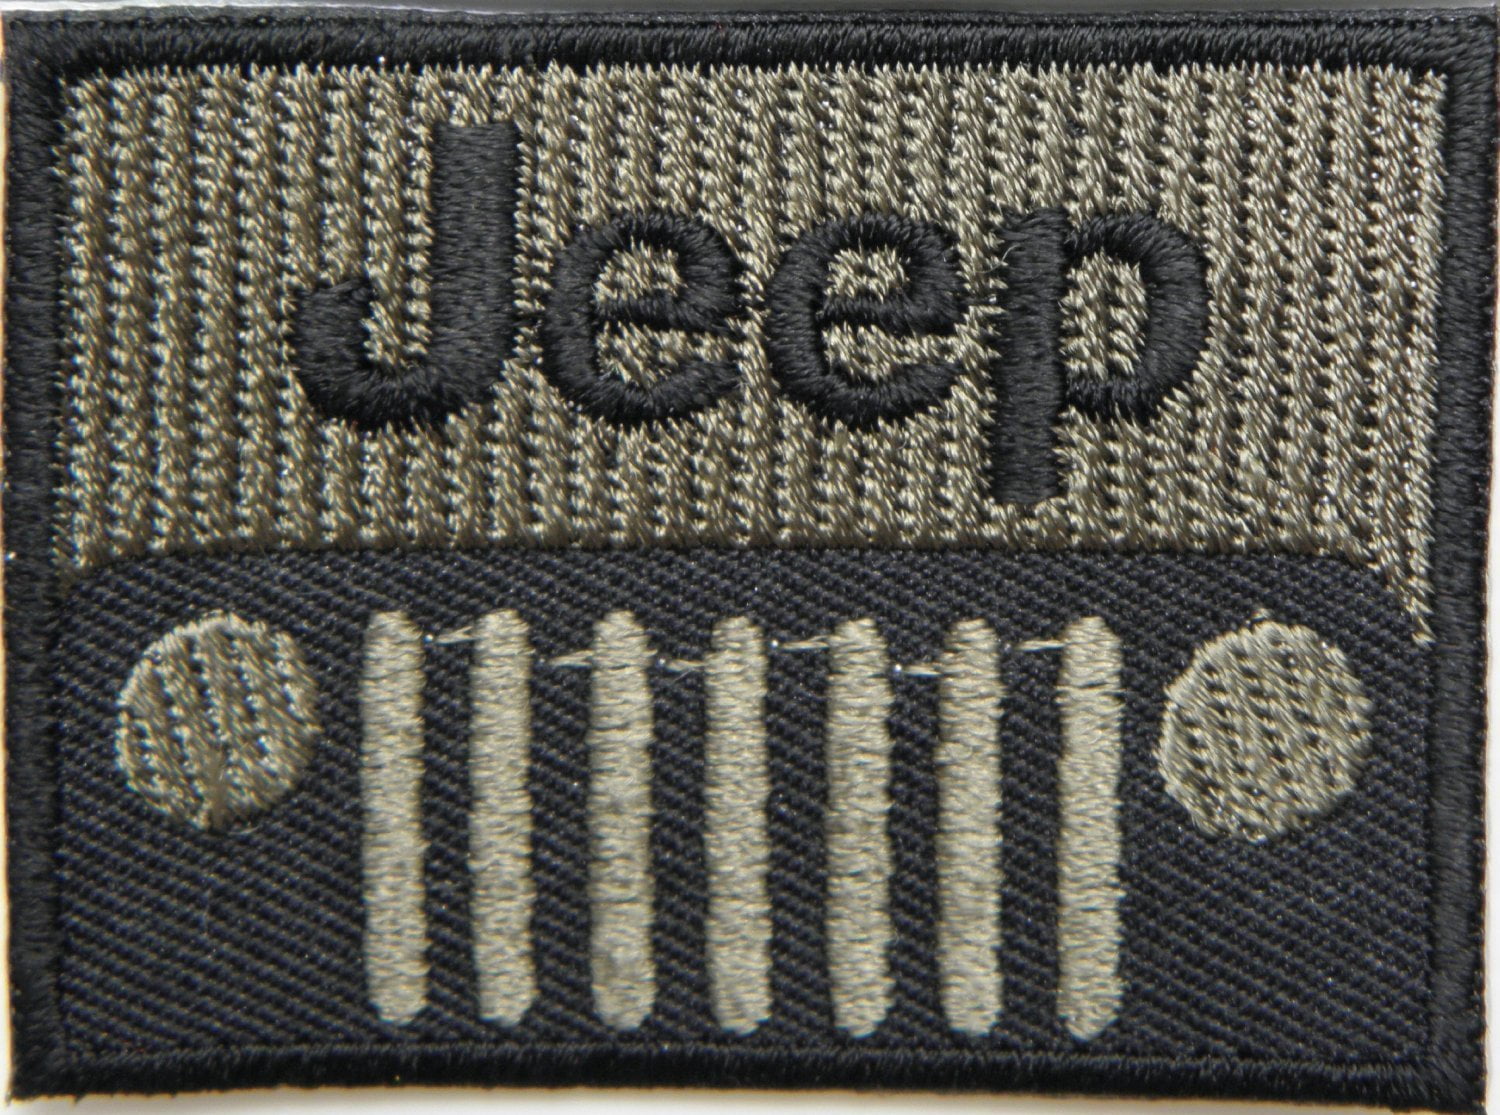 Jeep 4x4~Embroidered Patch~The American Legend~1941~3" Round~Iron or Sew On